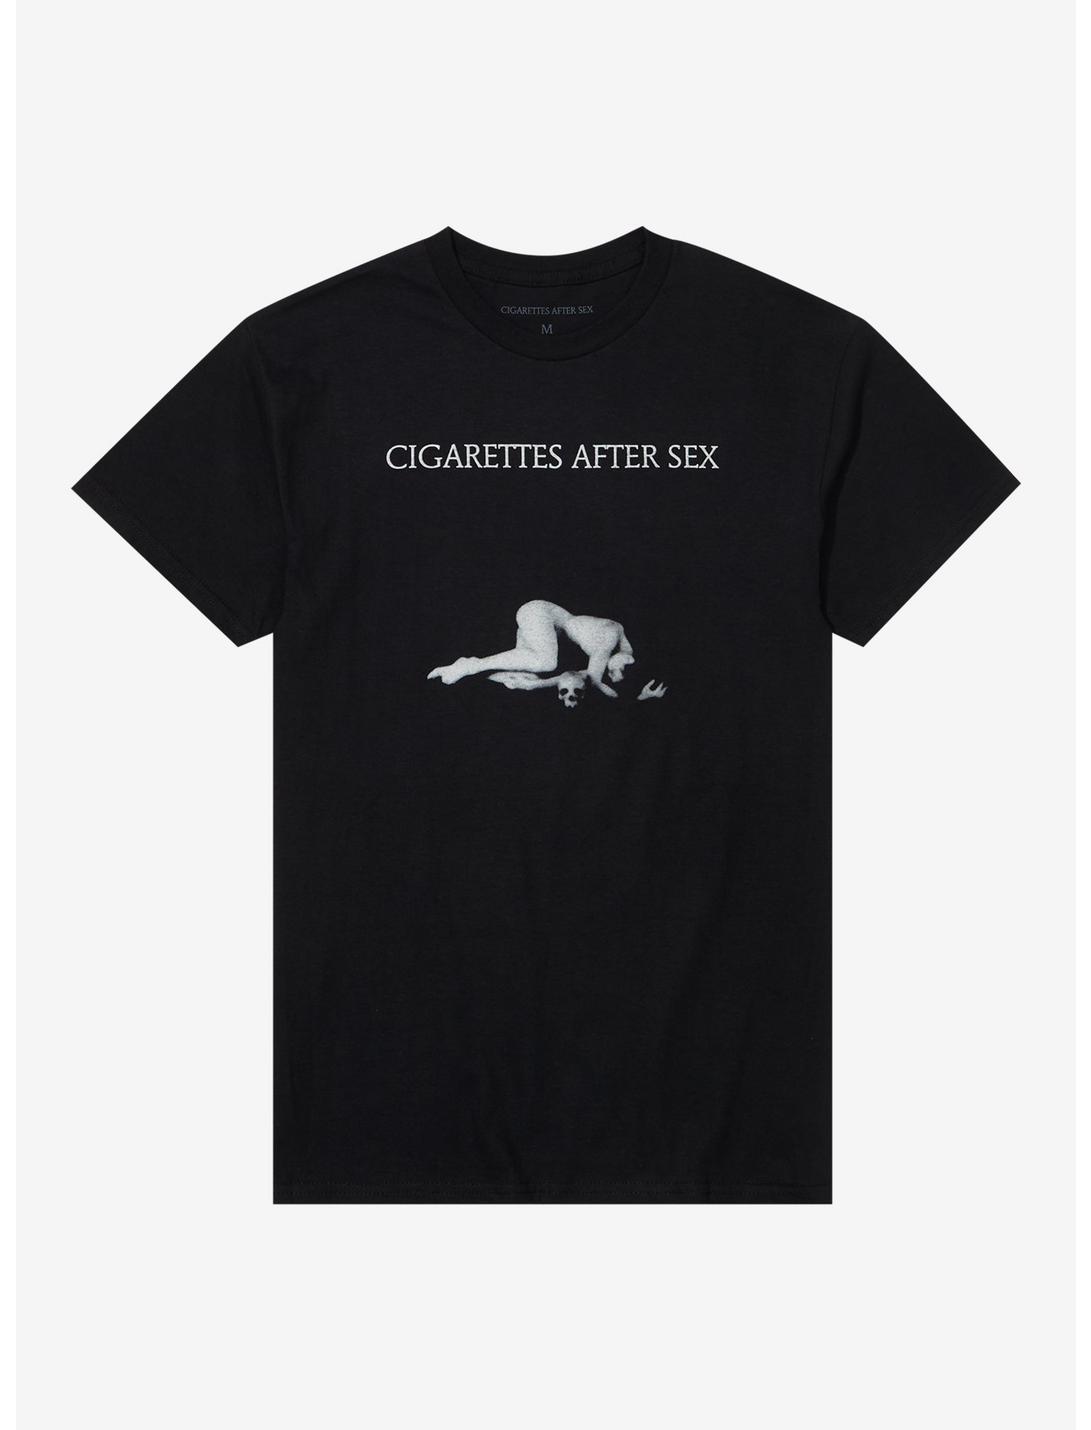 Cigarettes After Sex Each Time You Fall In Love T-Shirt, BLACK, hi-res